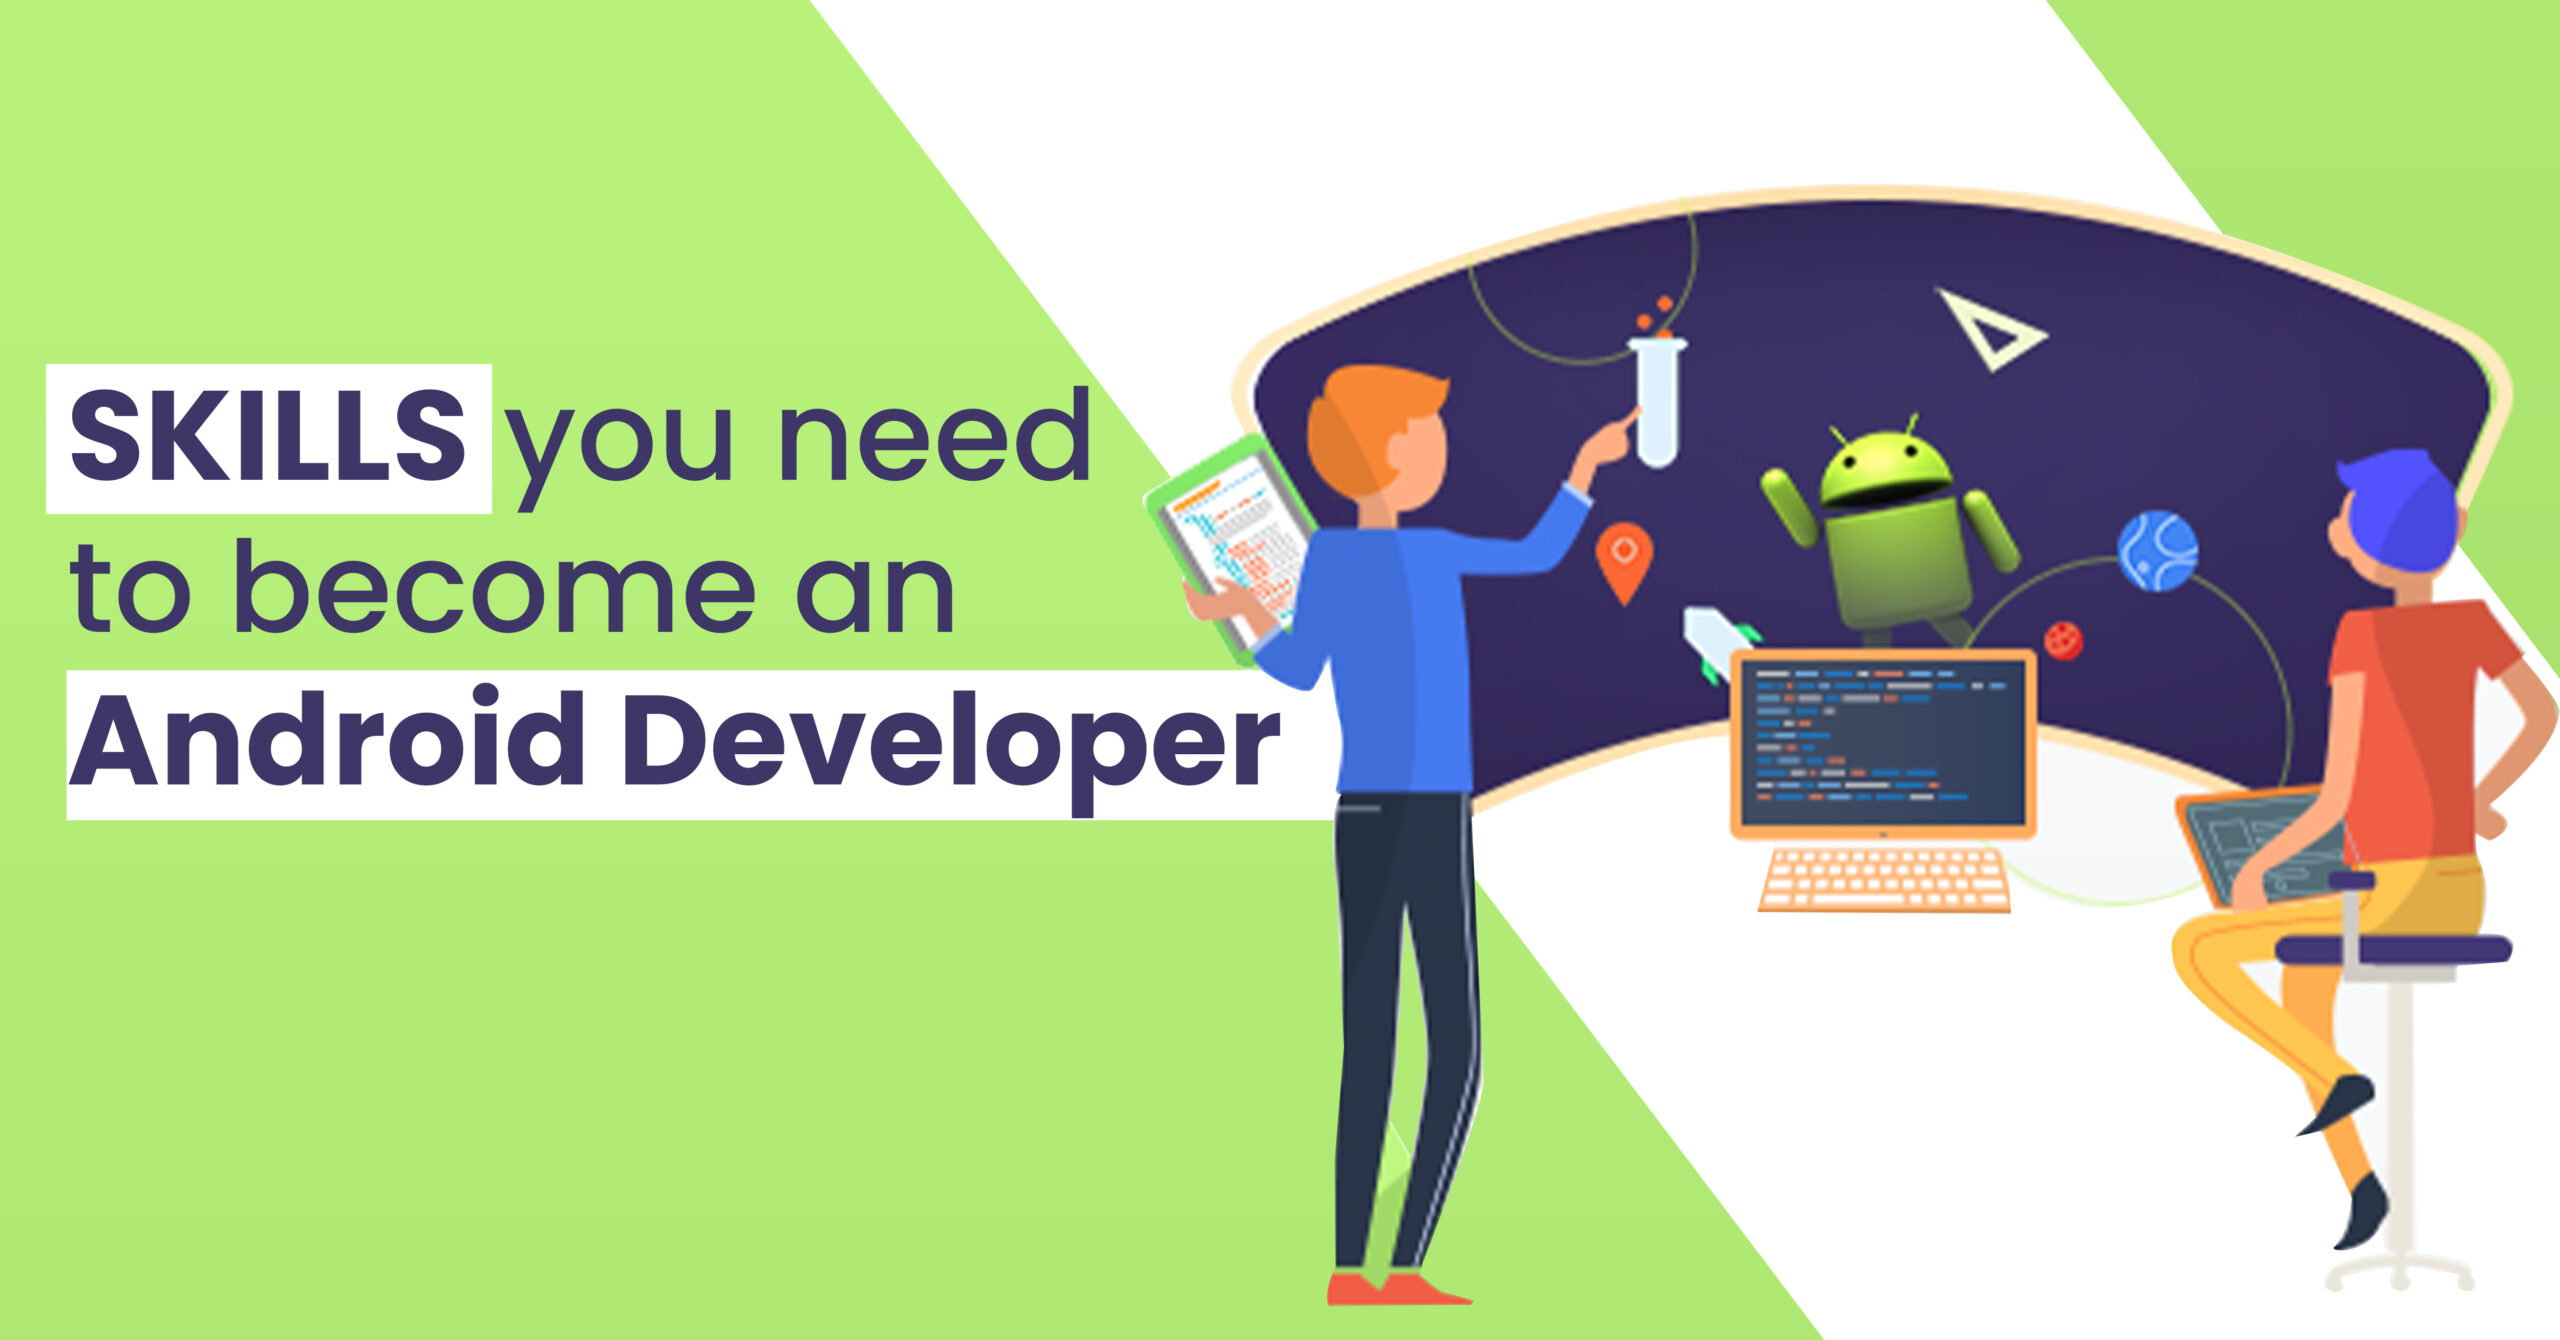 Skills you need to become an Android Developer